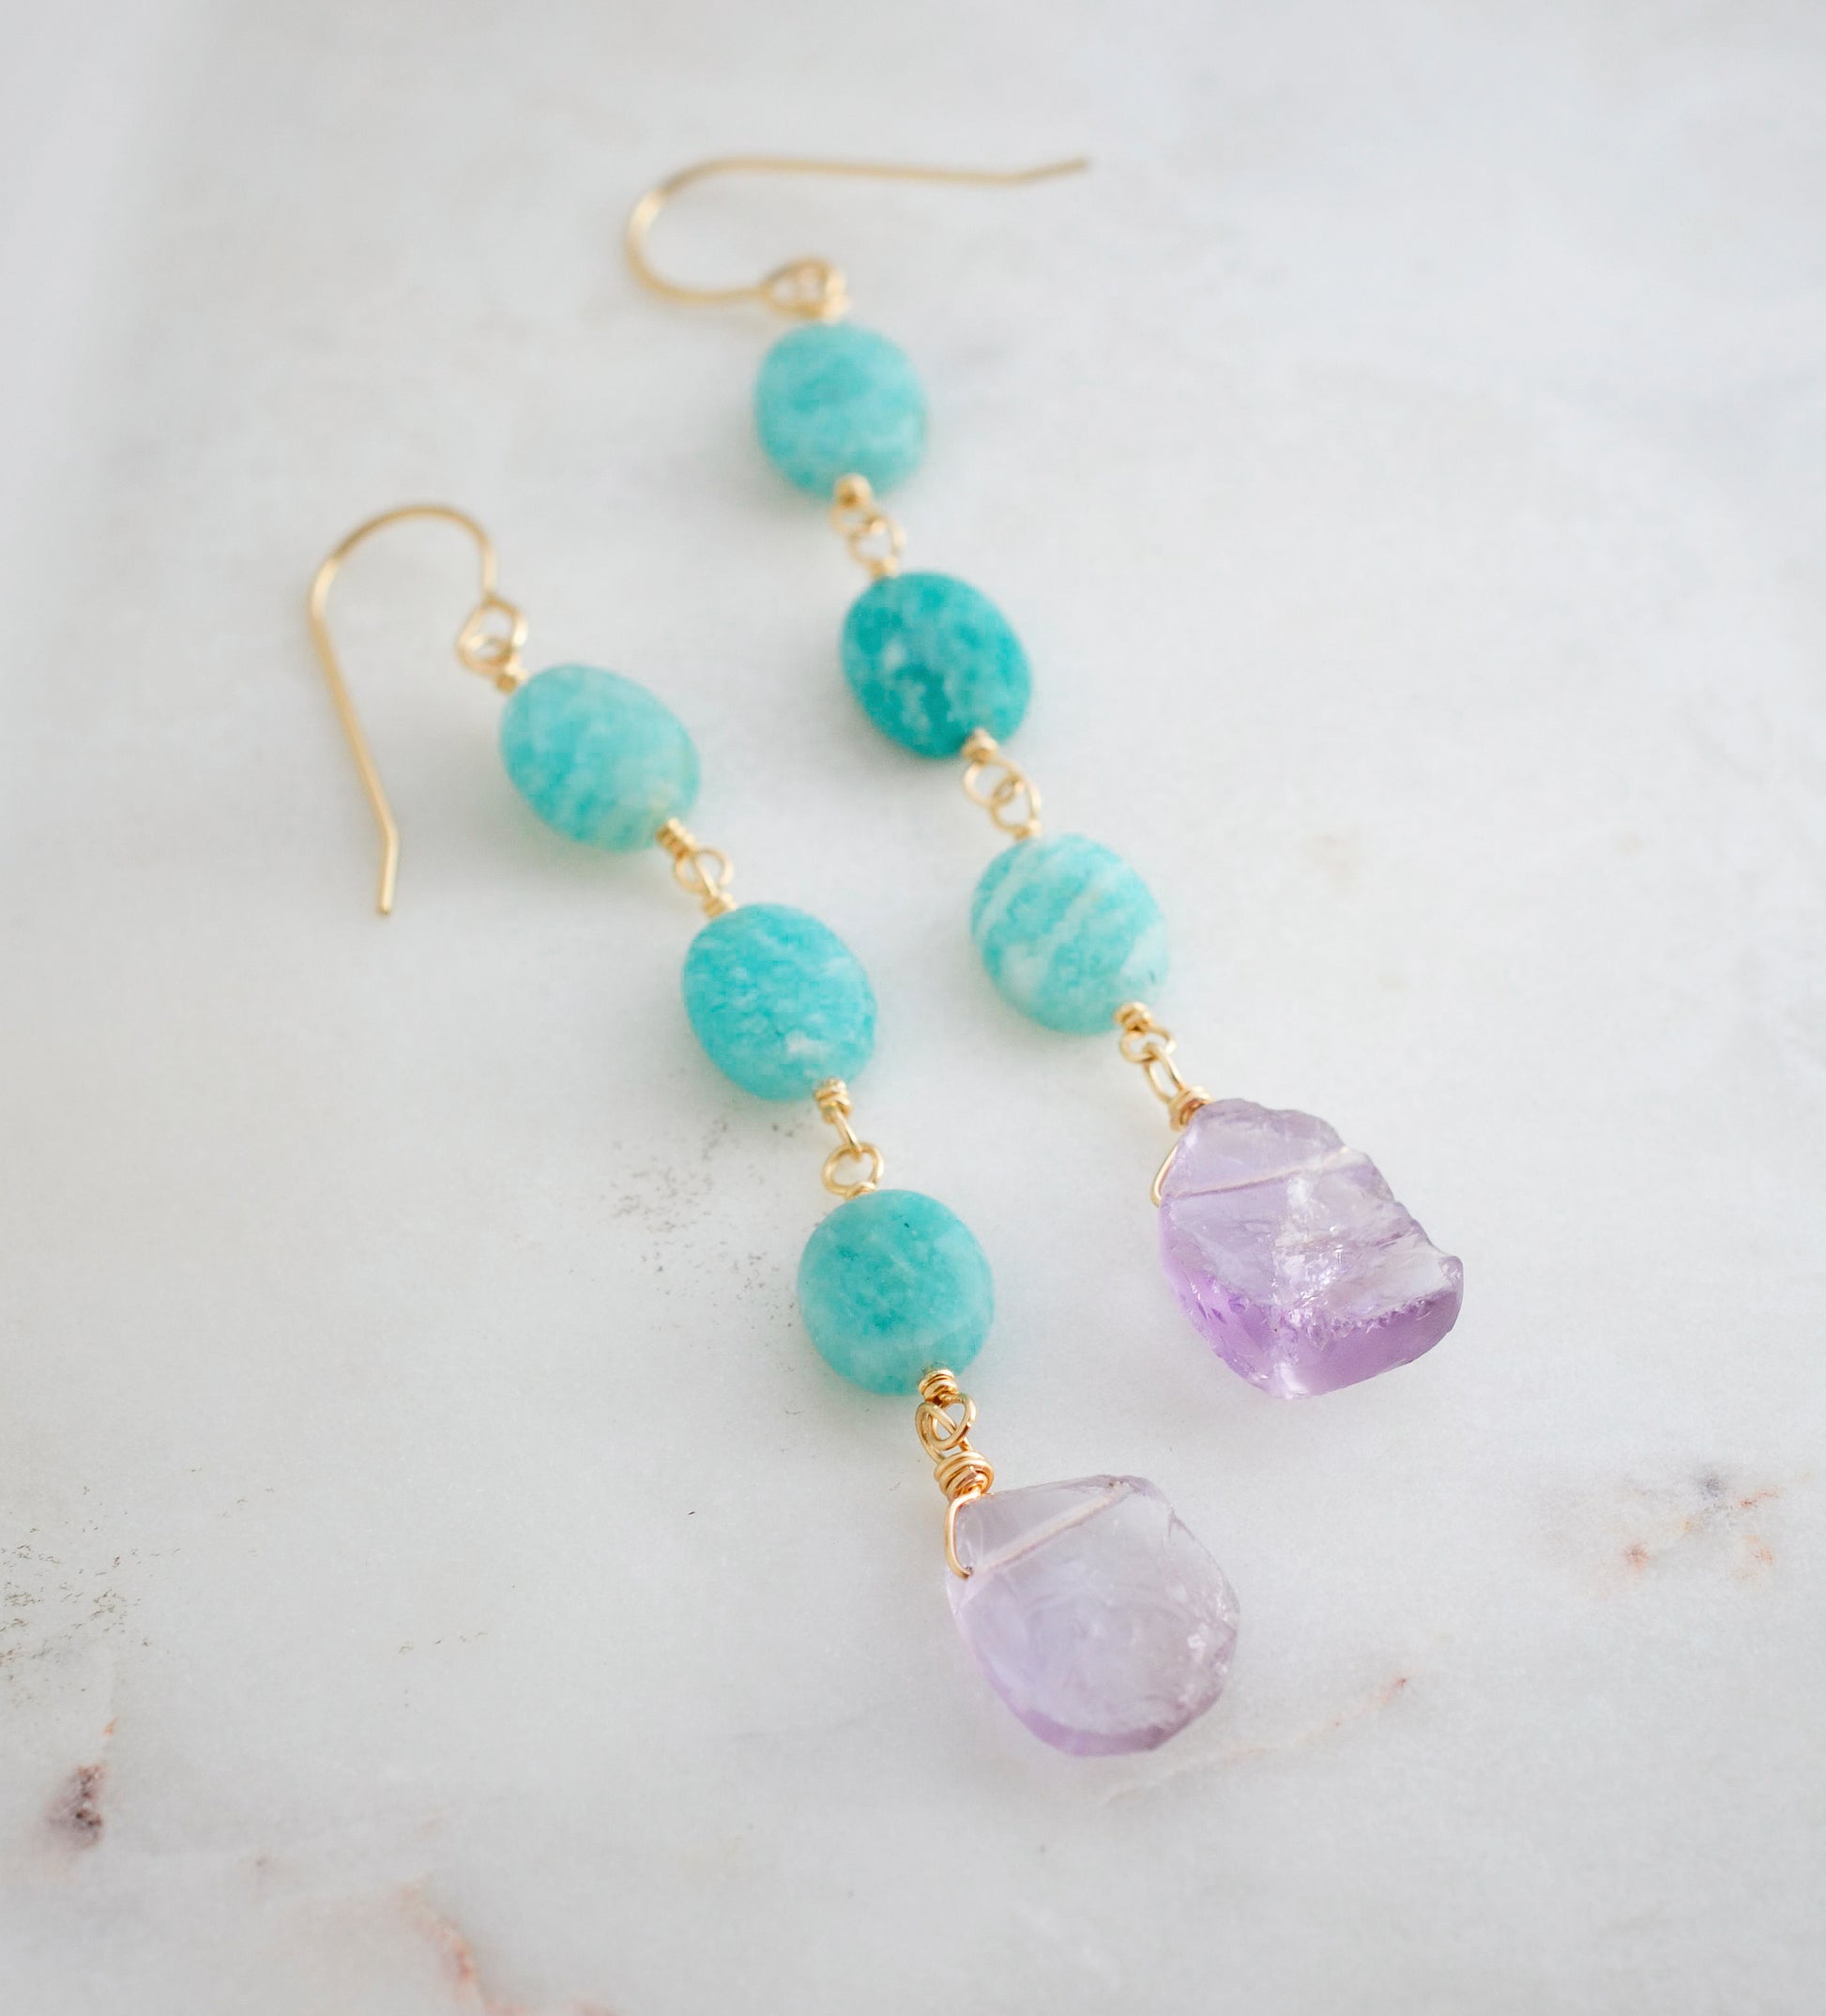 Three Amazonite faceted oval stones hang over raw, pale purple Amethyst crystals. Shown in the 14k gold filled style.